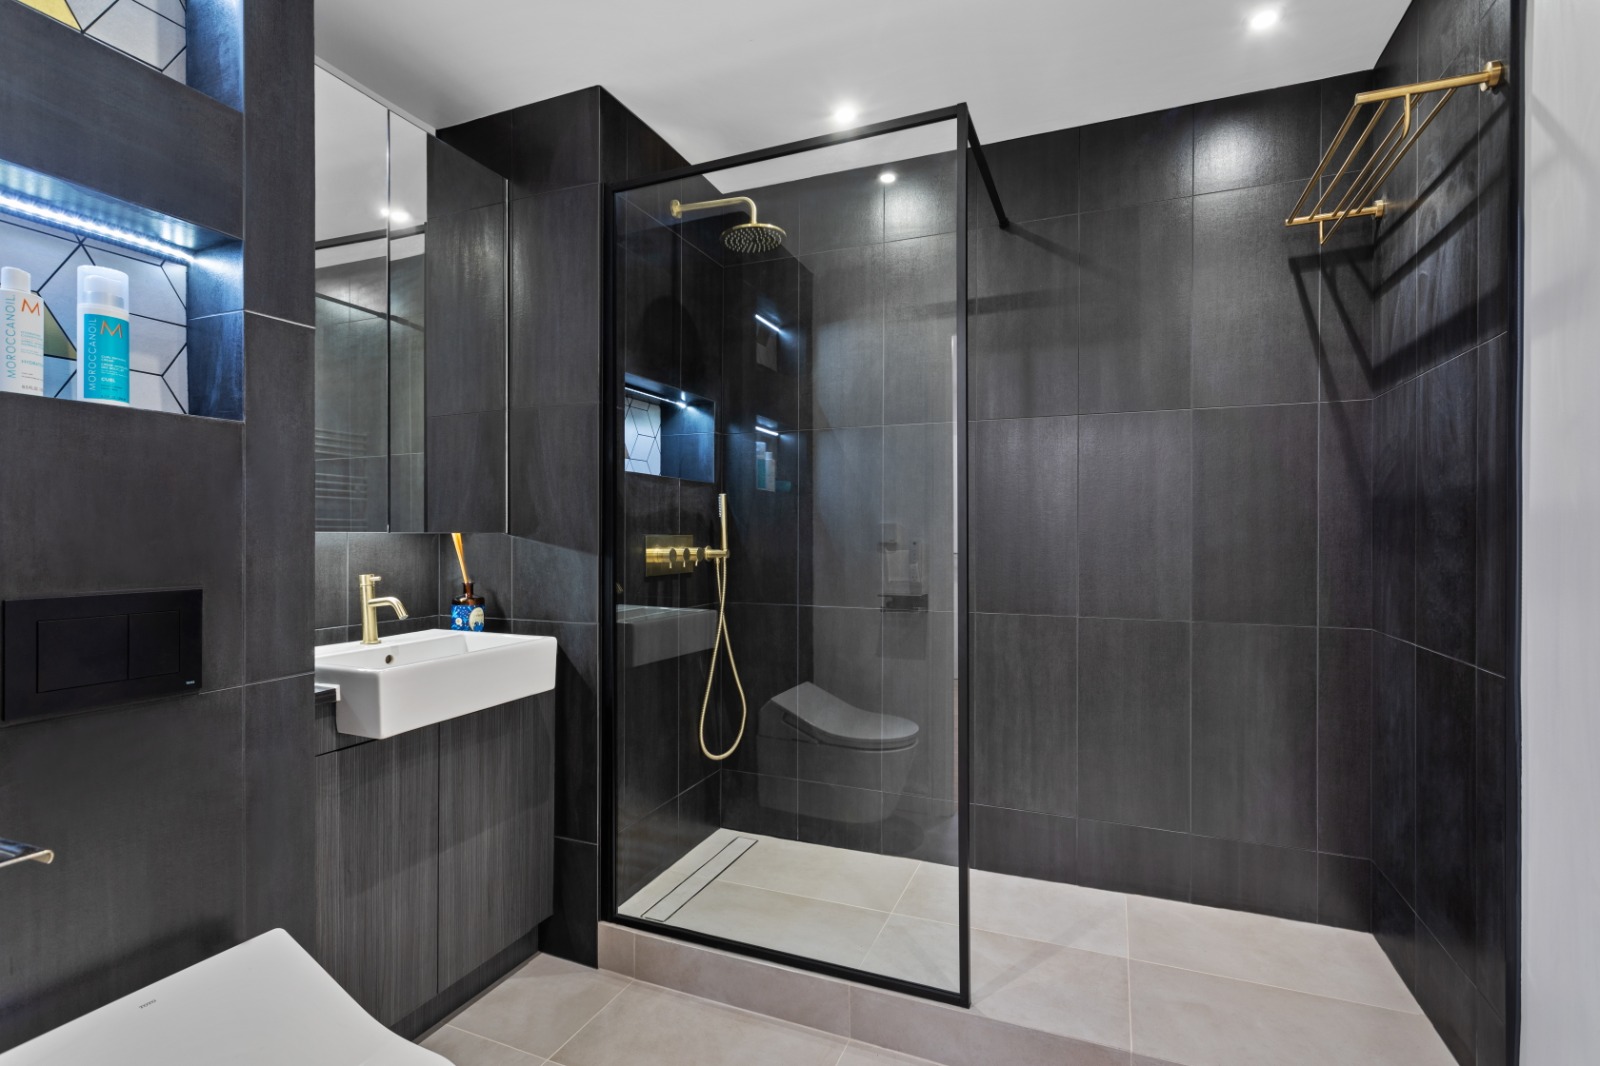 Design and fit-out - Stratford Bathroom